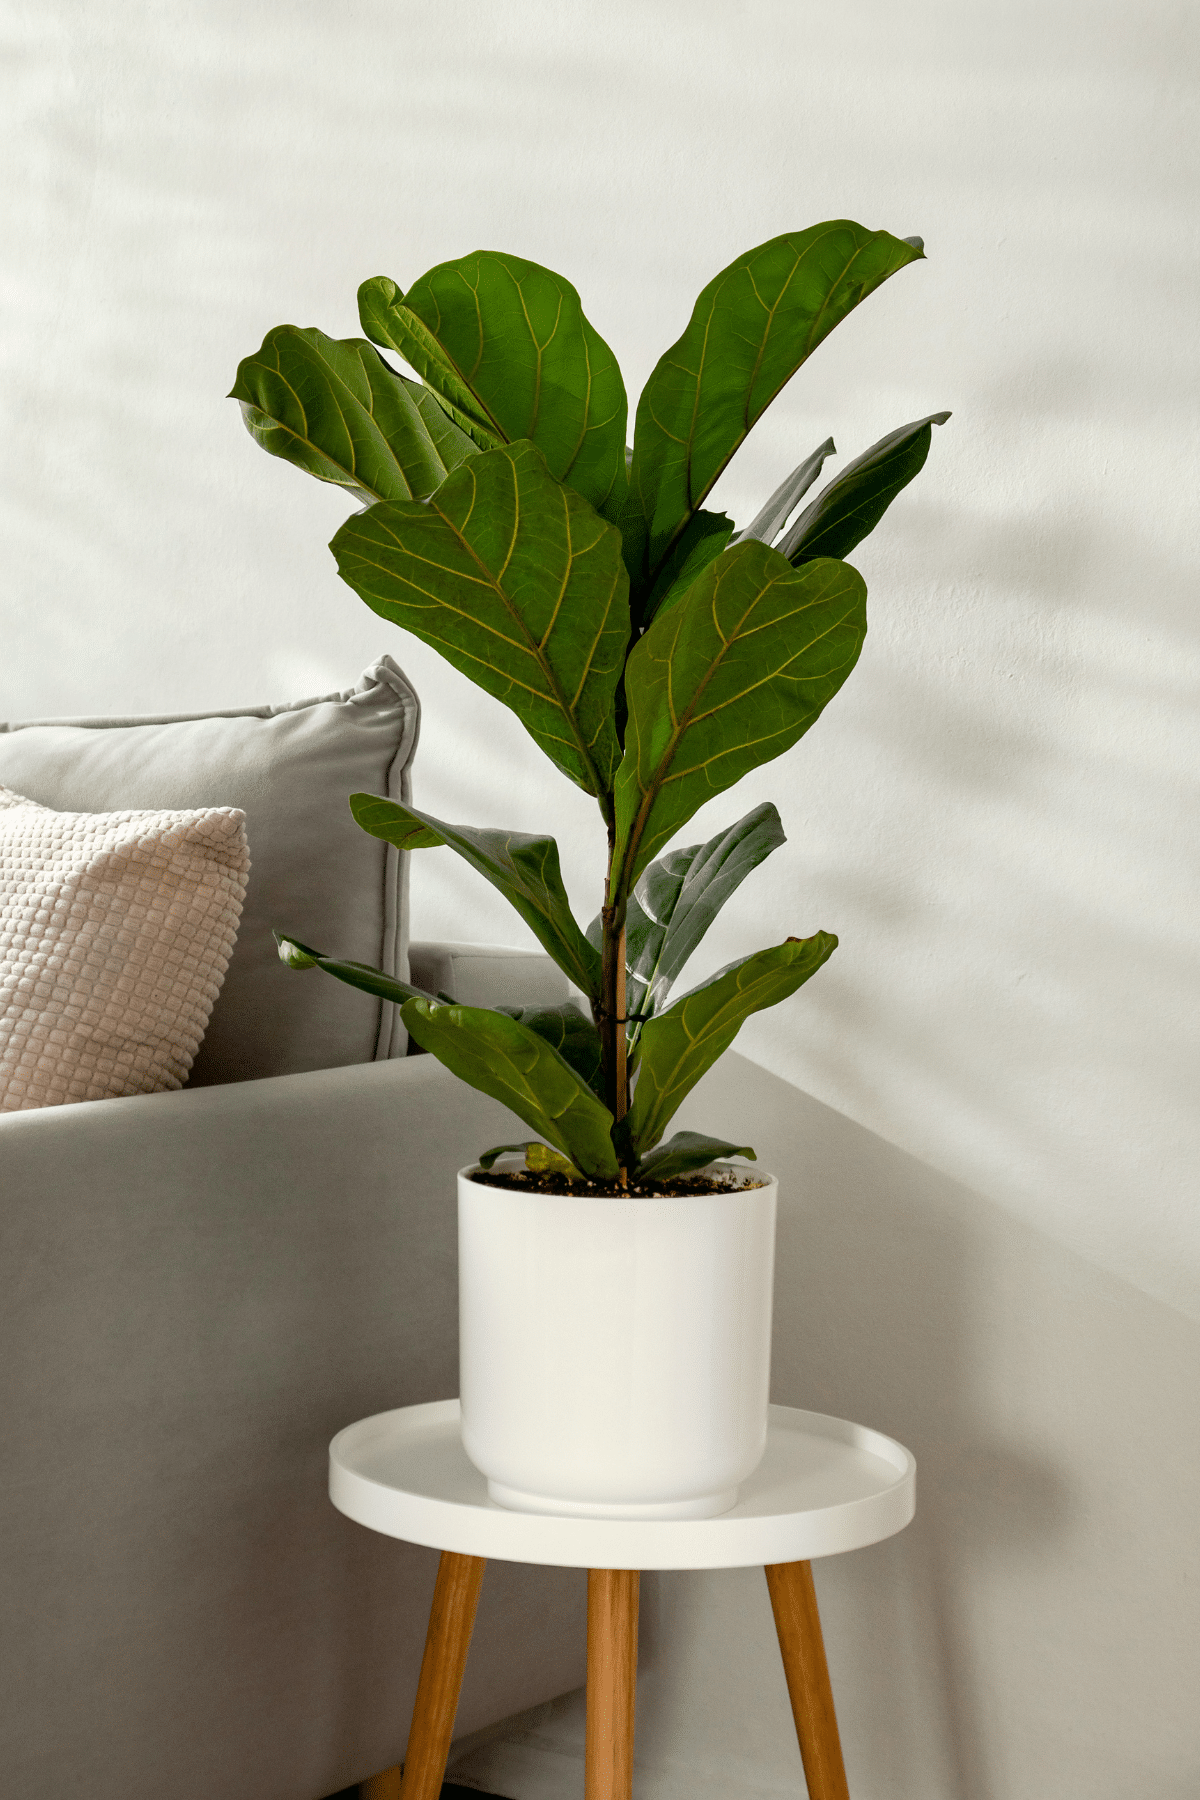 Fiddle Leaf Fig plant in a white pot on a white table, with sofa on the side.